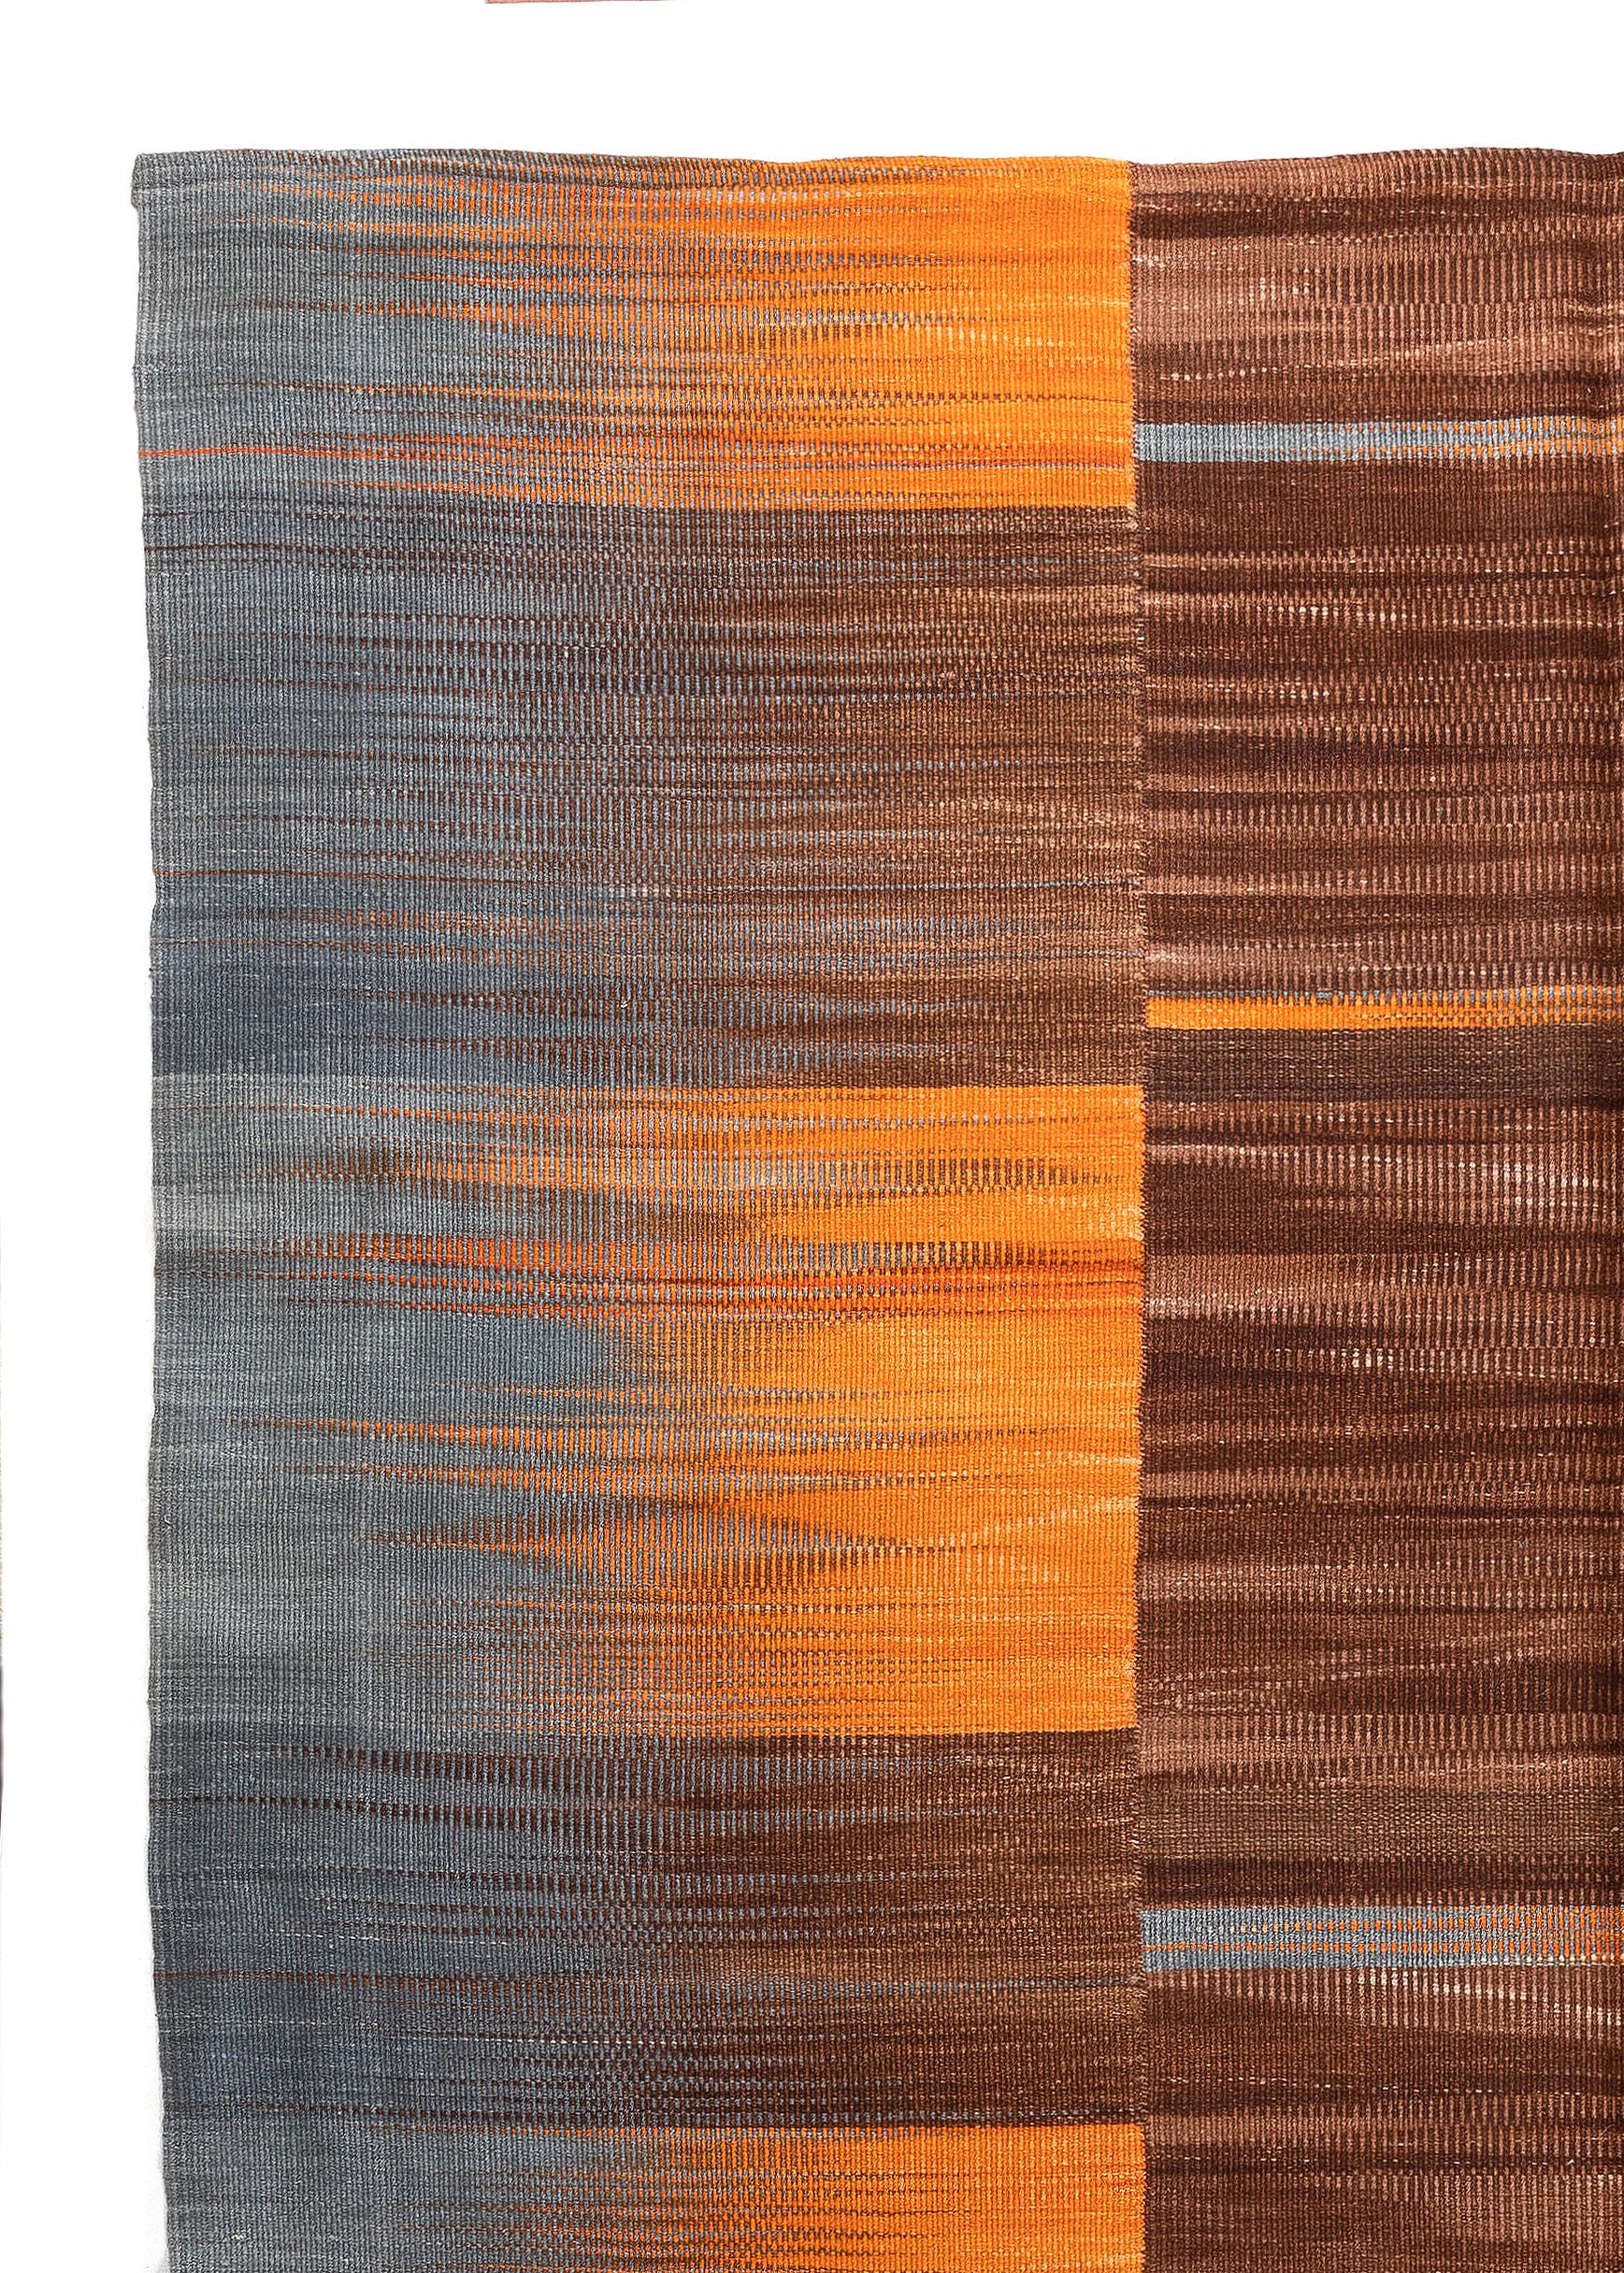 Wool 7'8'' x 10'9' New Turkish Kilim, Modern Double Sided Rug in Orange, Gray & Brown For Sale